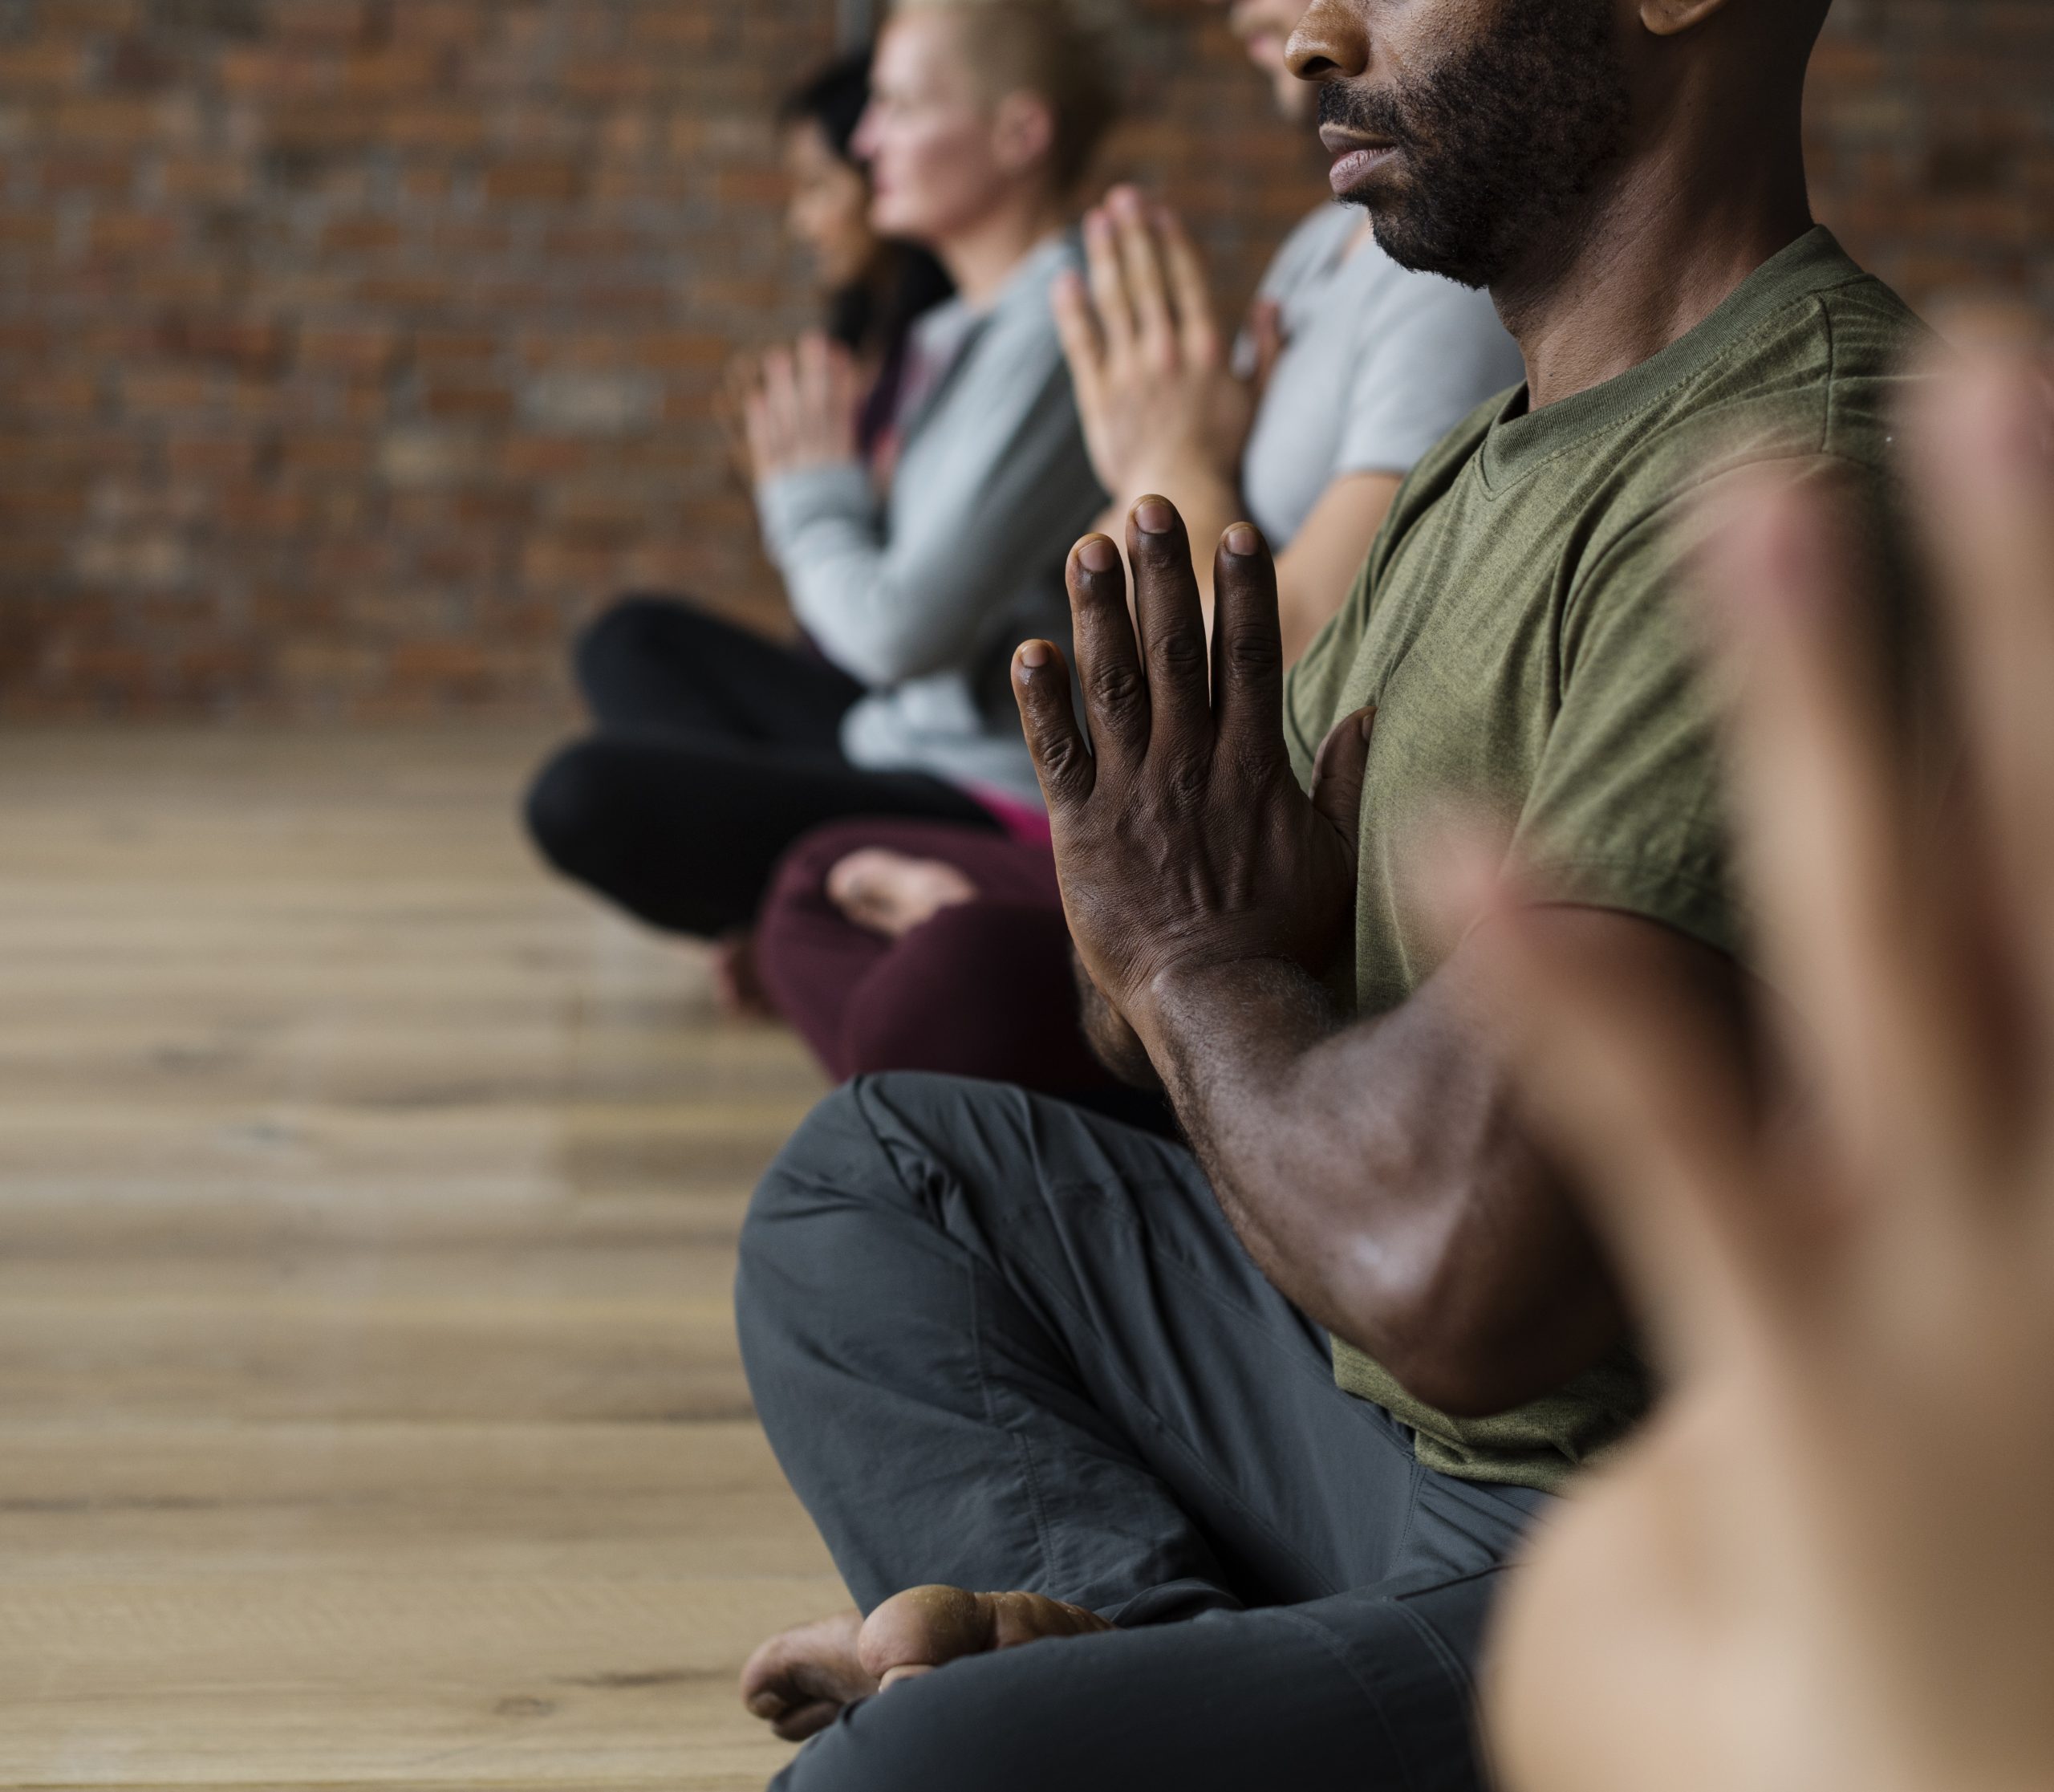 Just Breathe—Here are the Four Steps to Start Your Breathwork Practice